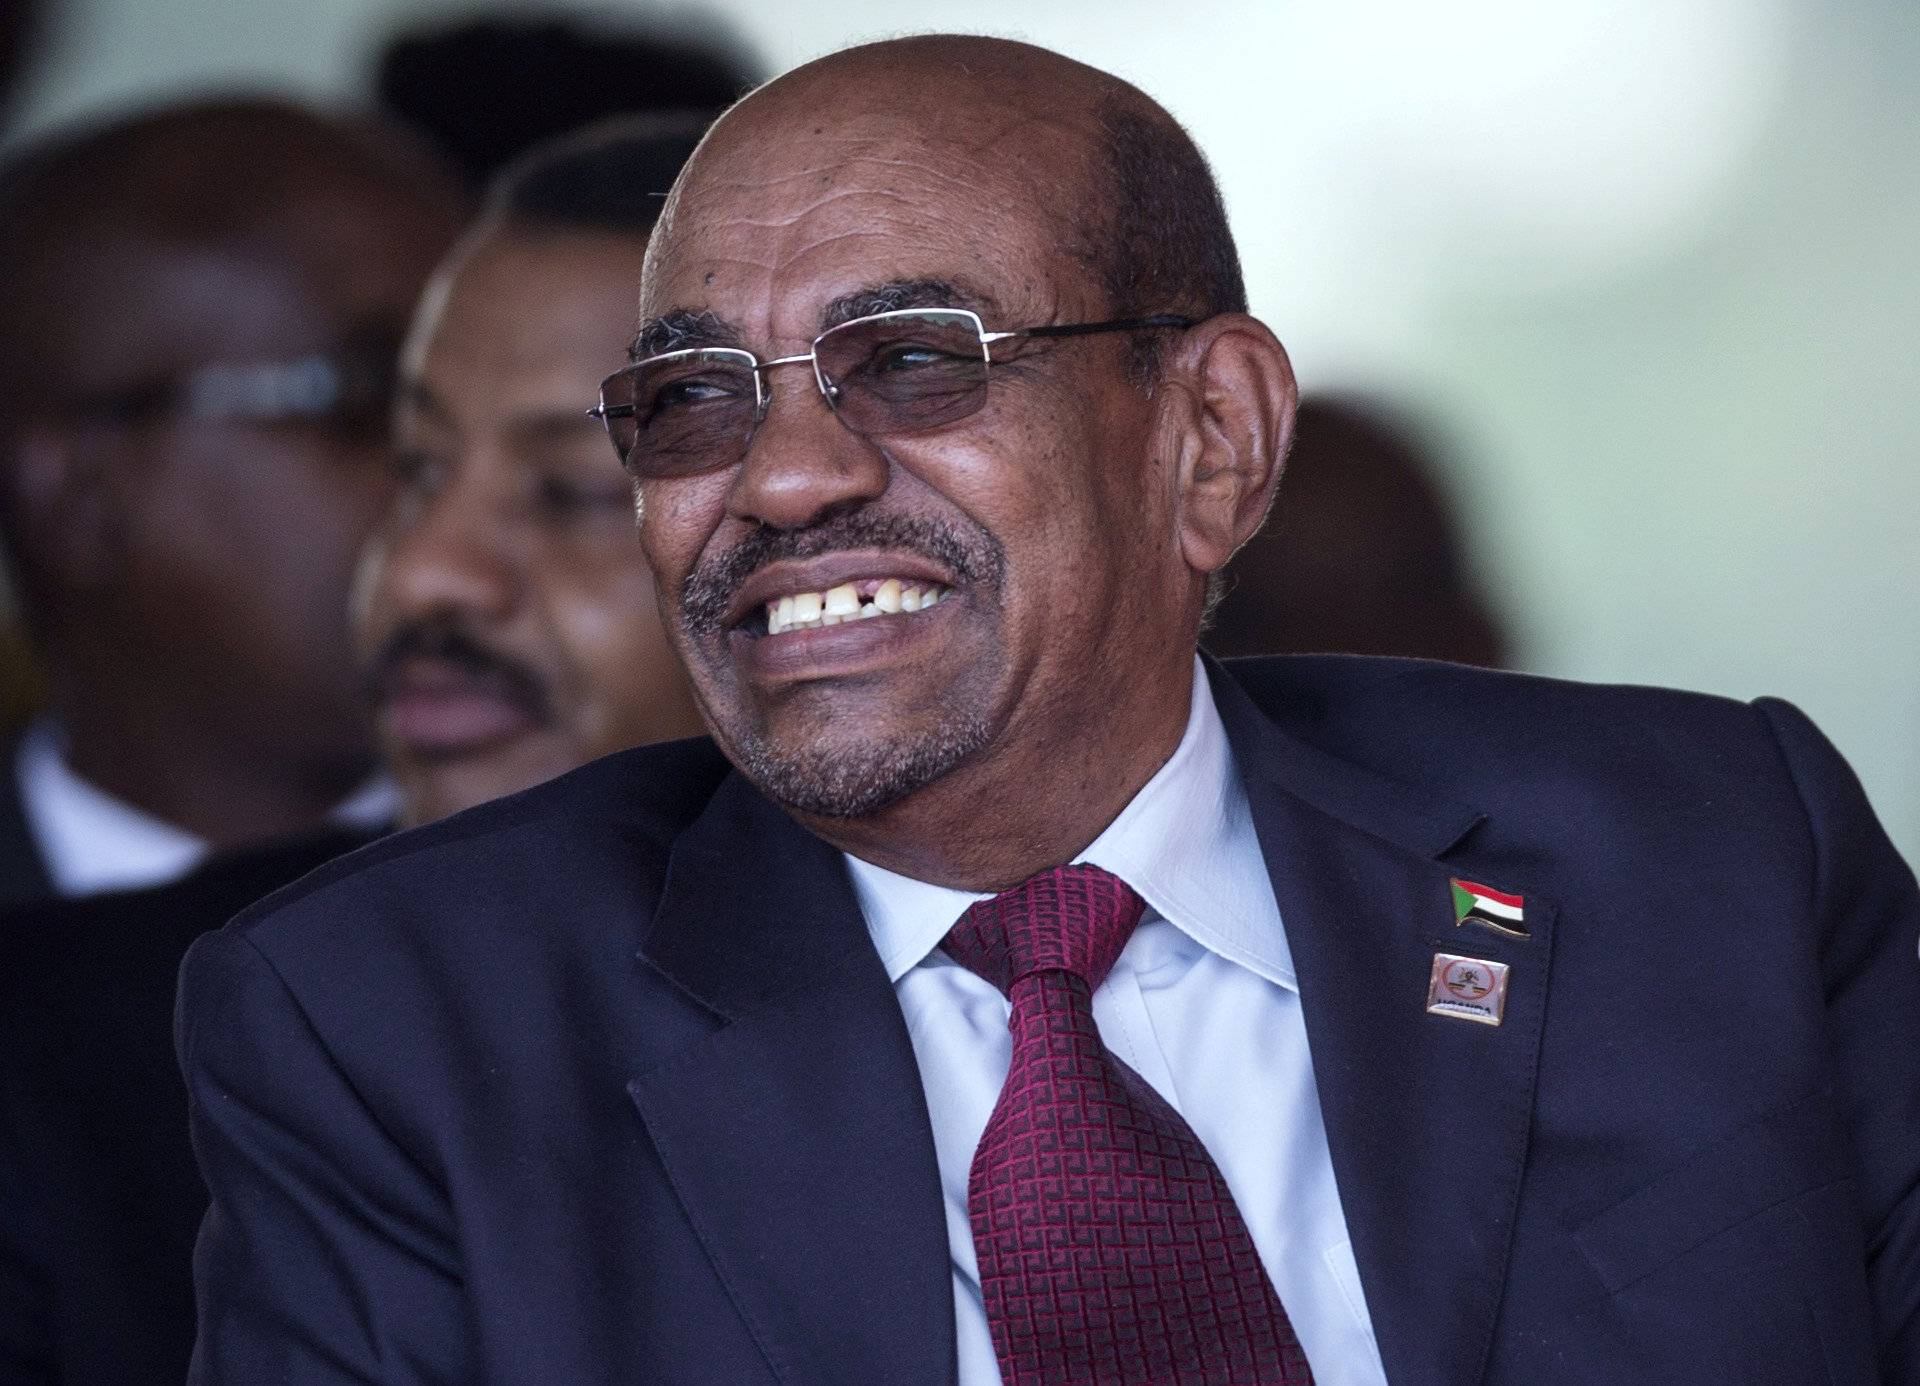 Sudan's President al-Bashir attends the swearing-in ceremony of Uganda's president Museveni at the Kololo independence grounds in Kampala, Uganda 